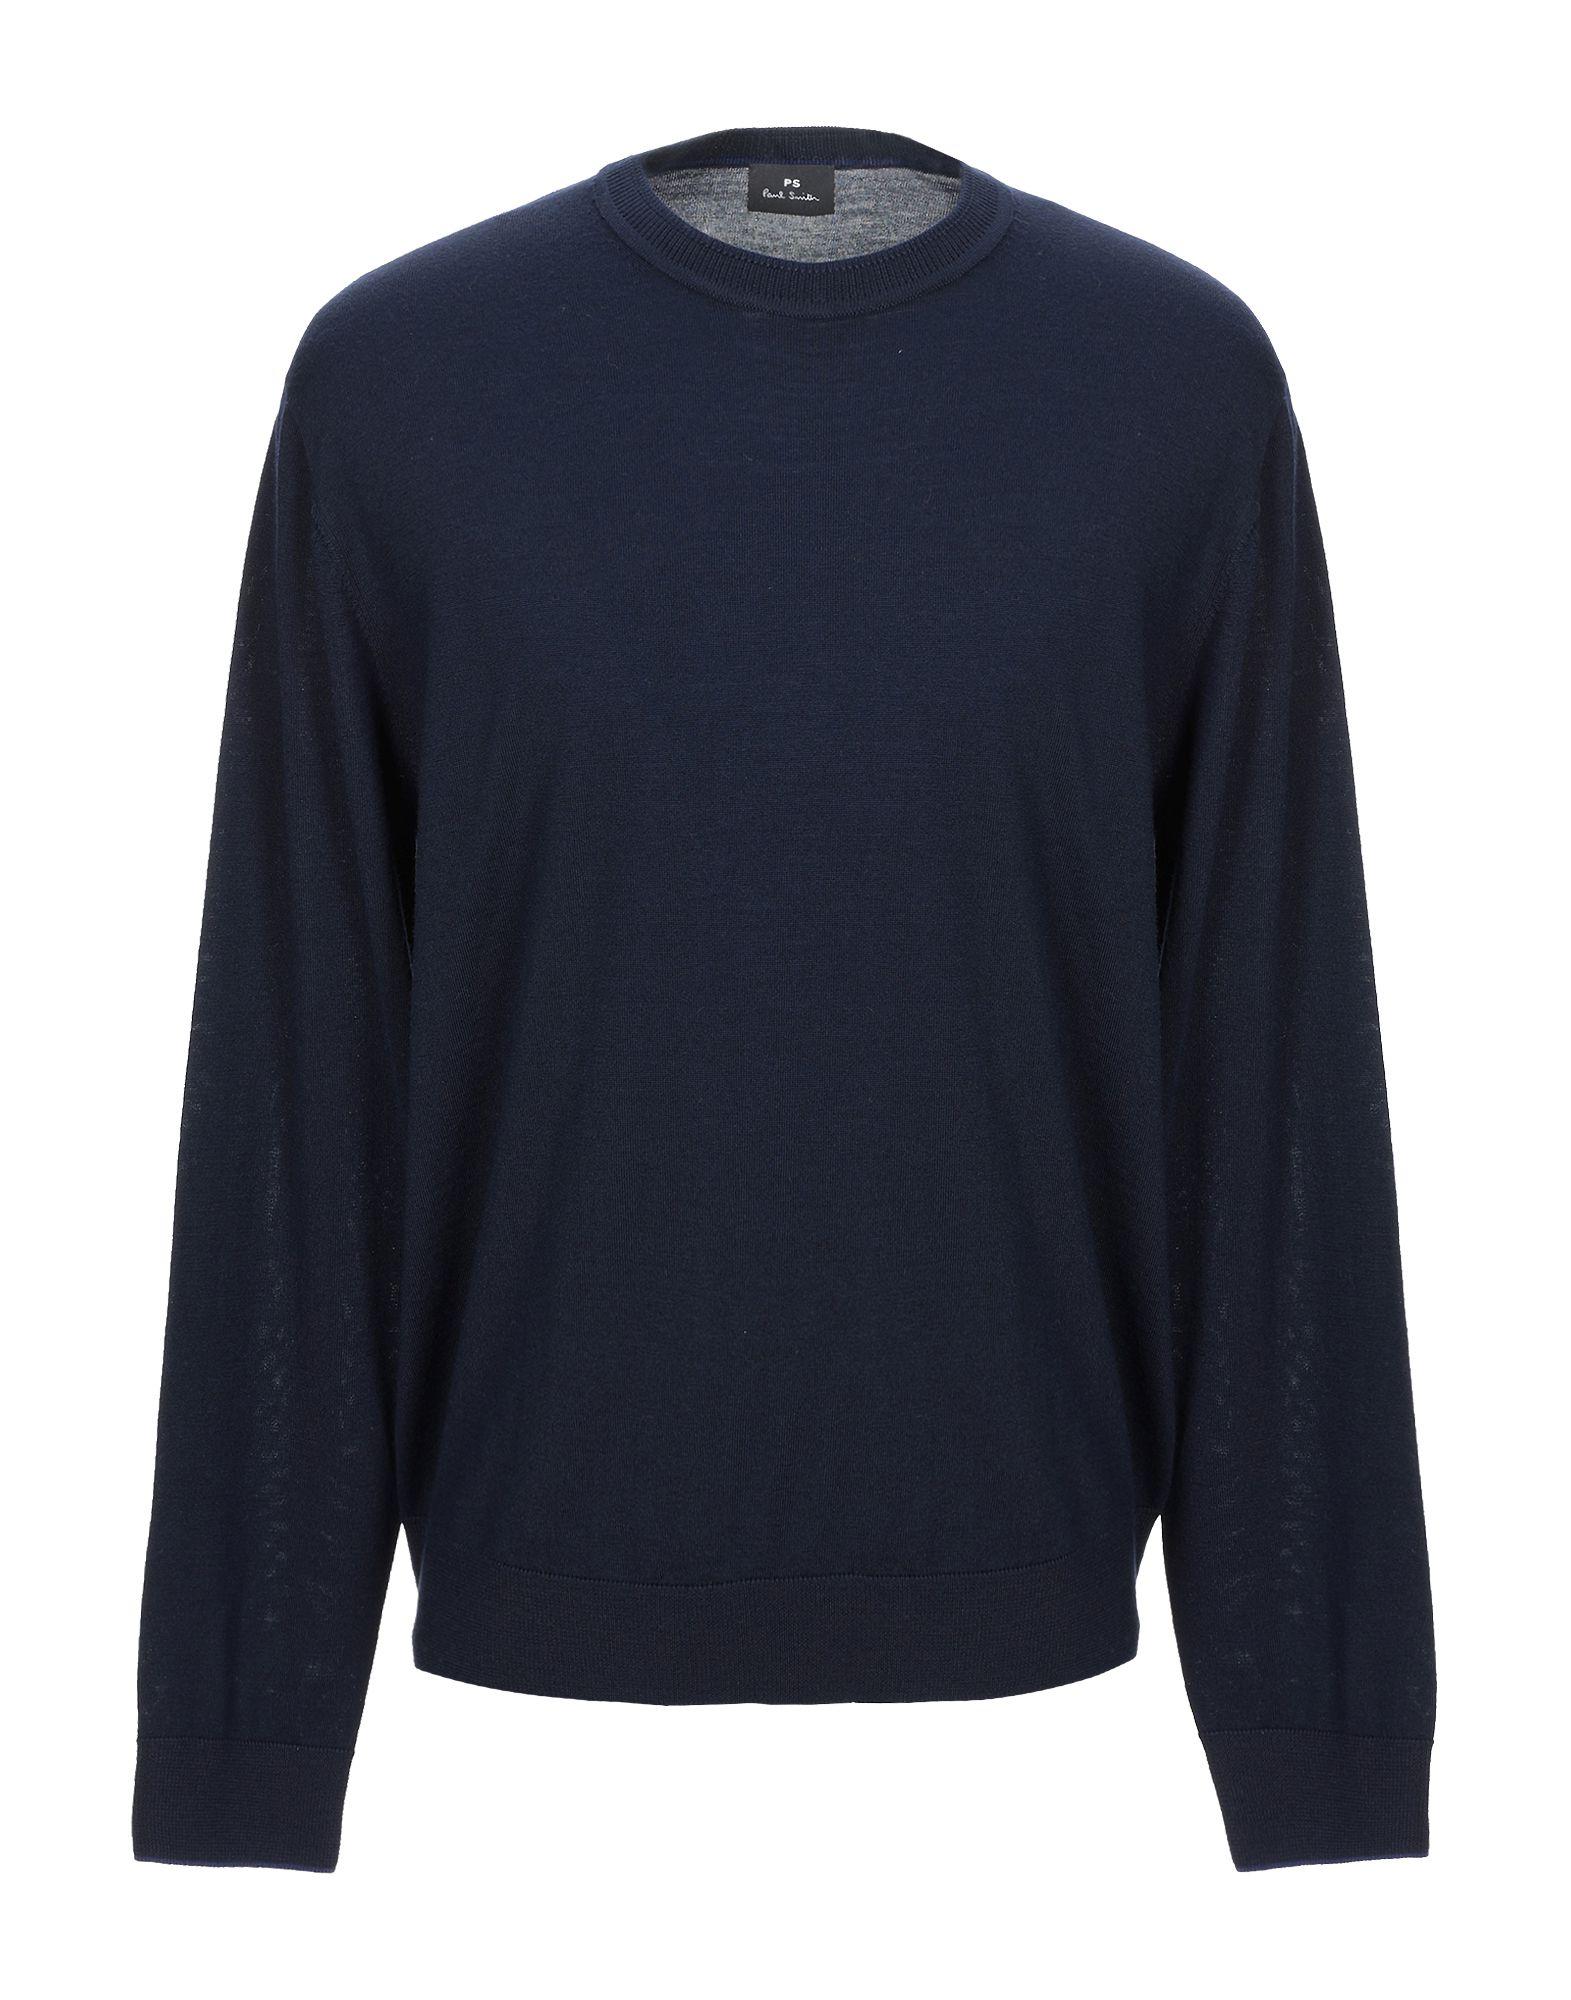 PS by Paul Smith Jumper in Blue for Men - Lyst